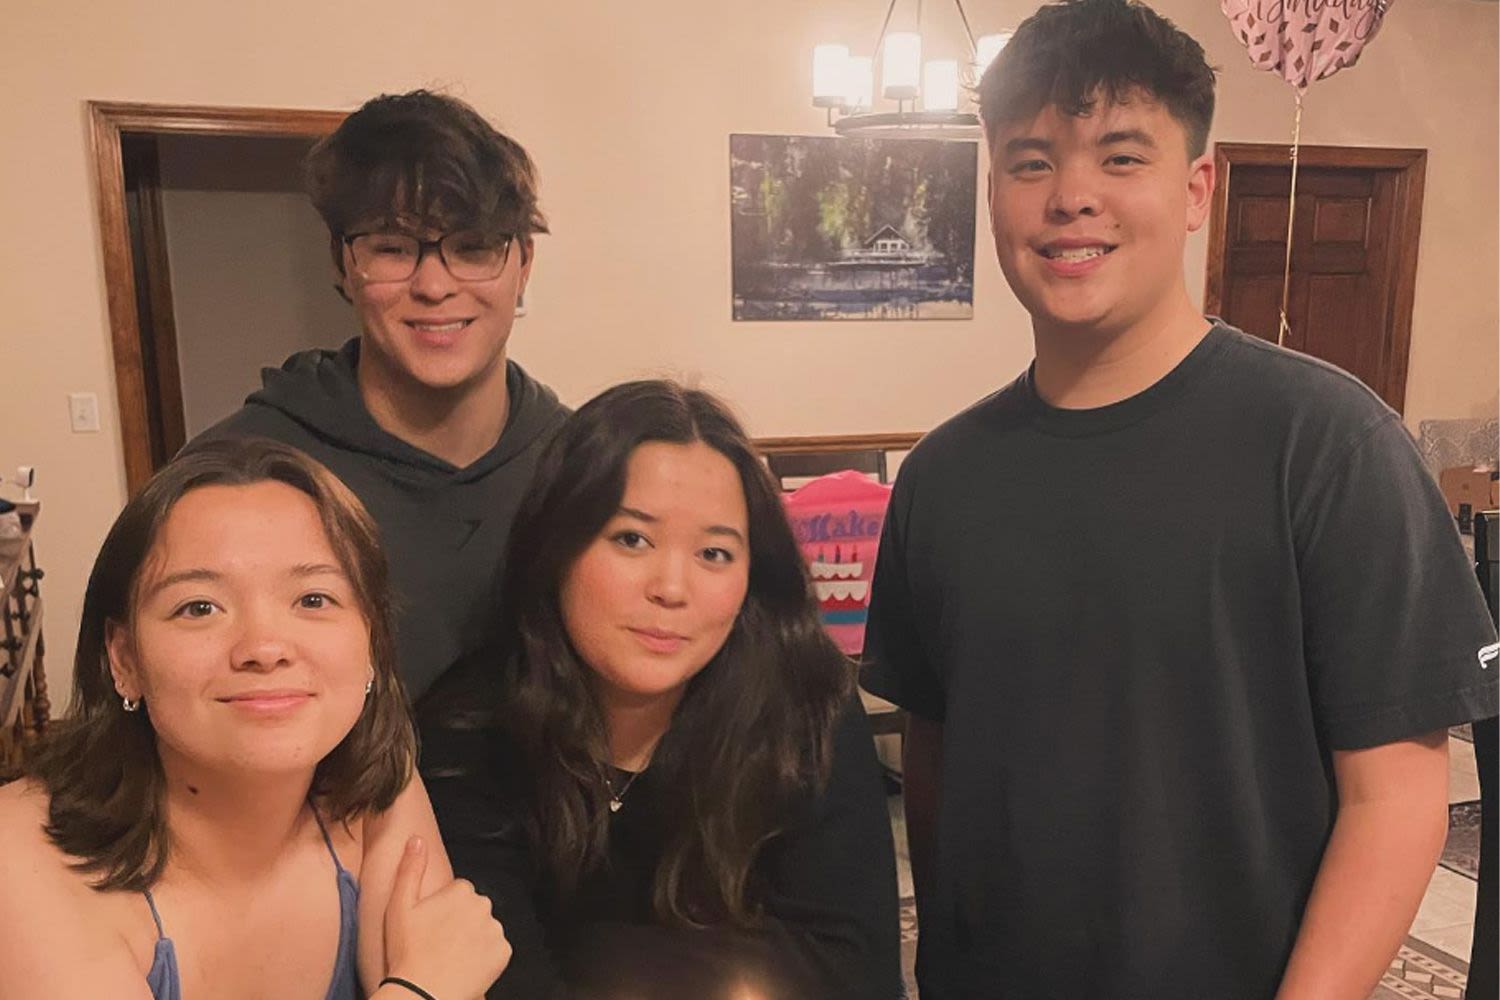 Kate Gosselin Shares Rare Photo of 4 of Her Sextuplets to Mark Their 20th Birthdays: ‘No More Teenagers in This House’